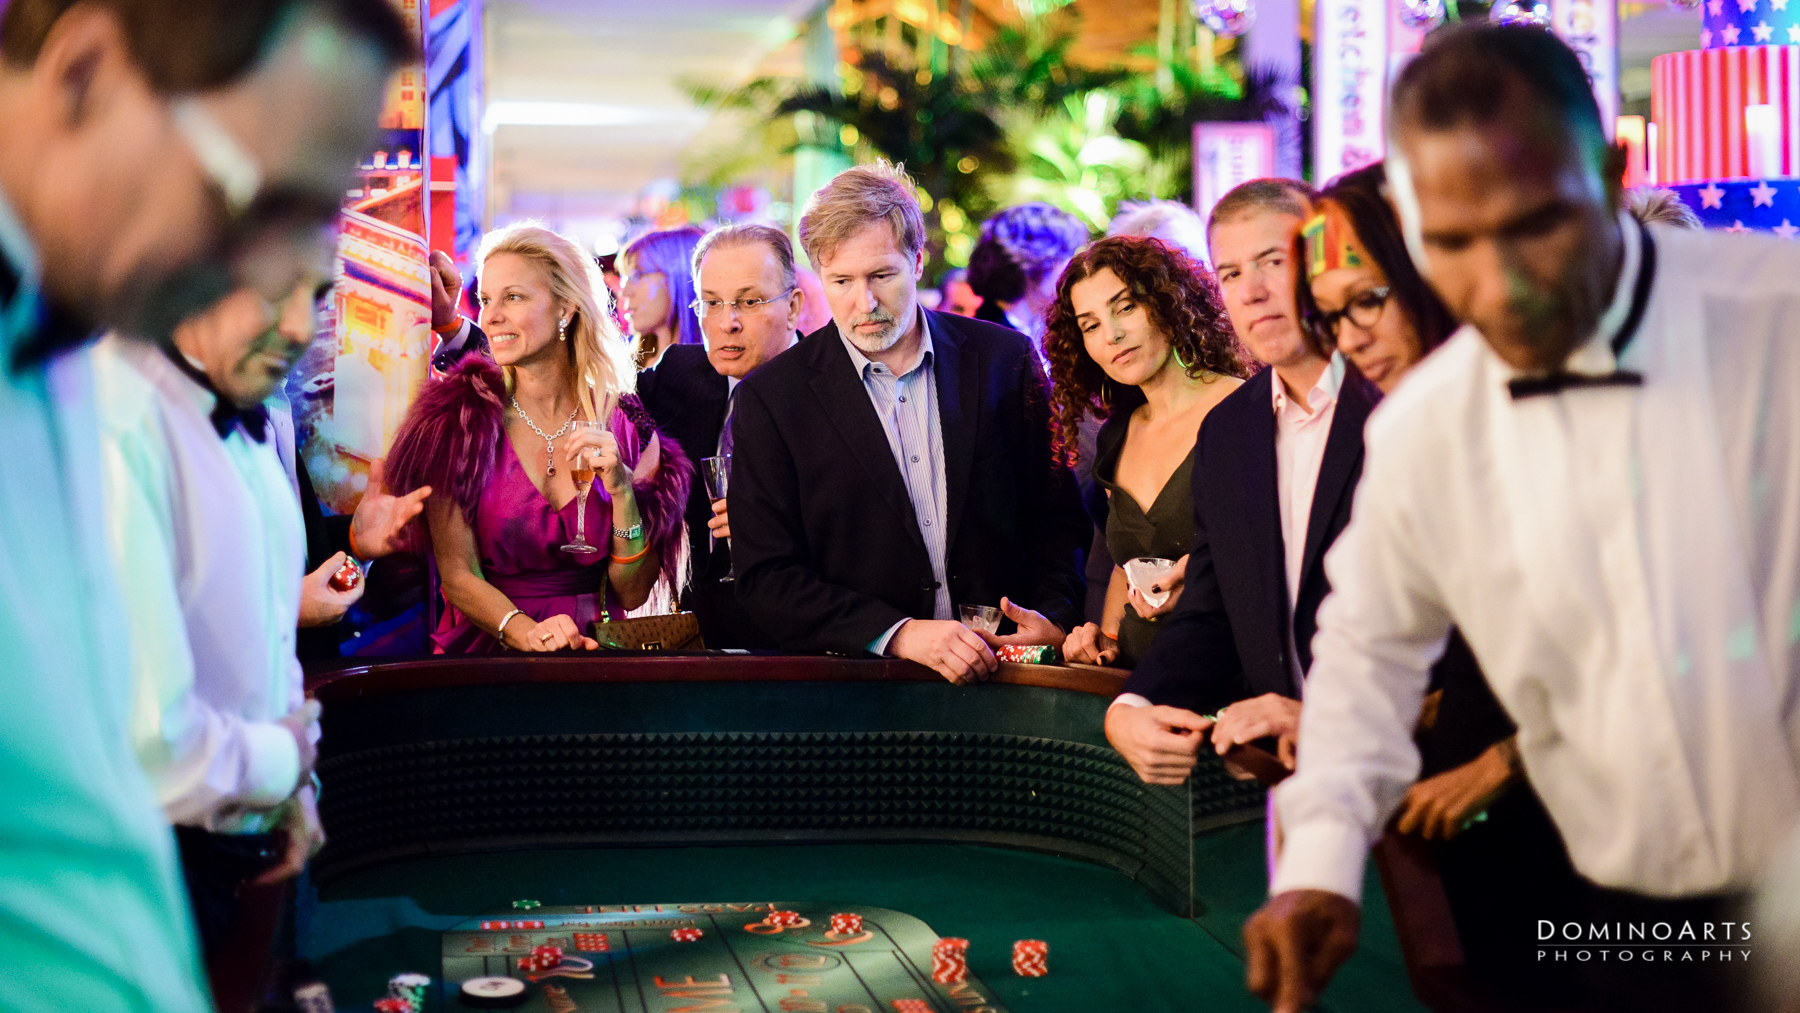 Poker entertainment at Miami Fashion Corporate event in Bal harbour by Domino Arts Photography